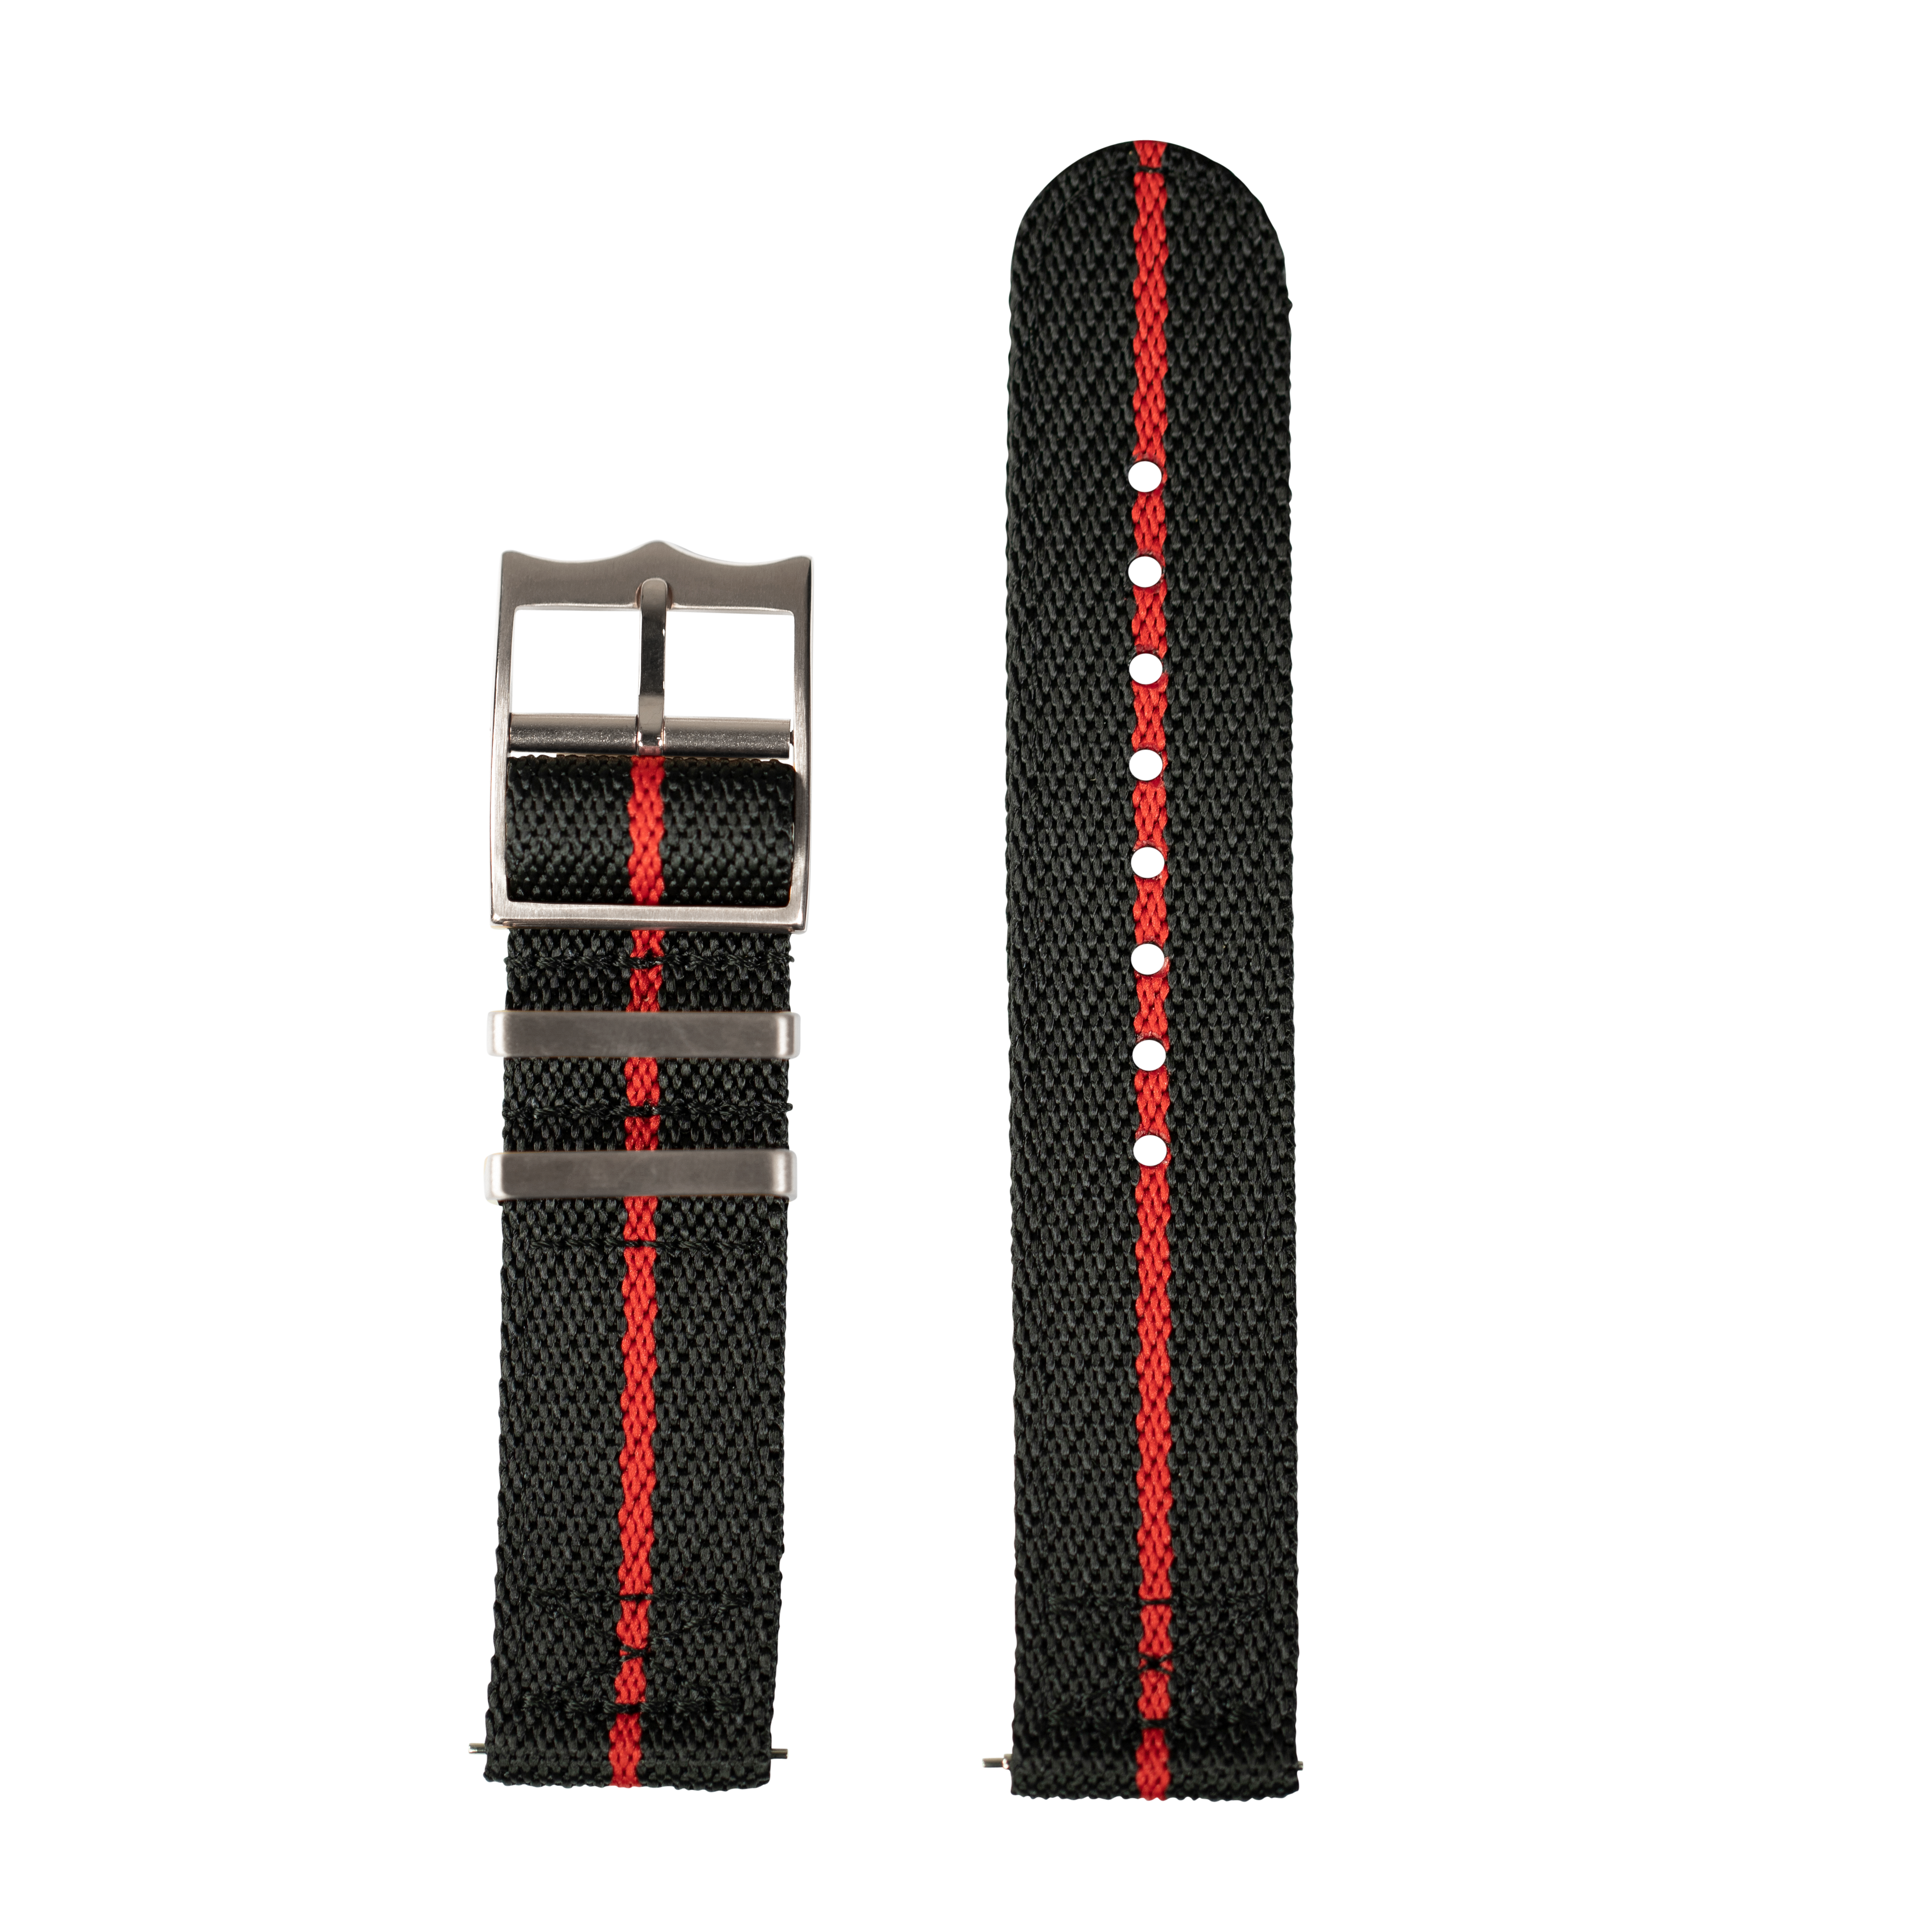 [Quick Release] Cross Militex - Black and Red Stripe